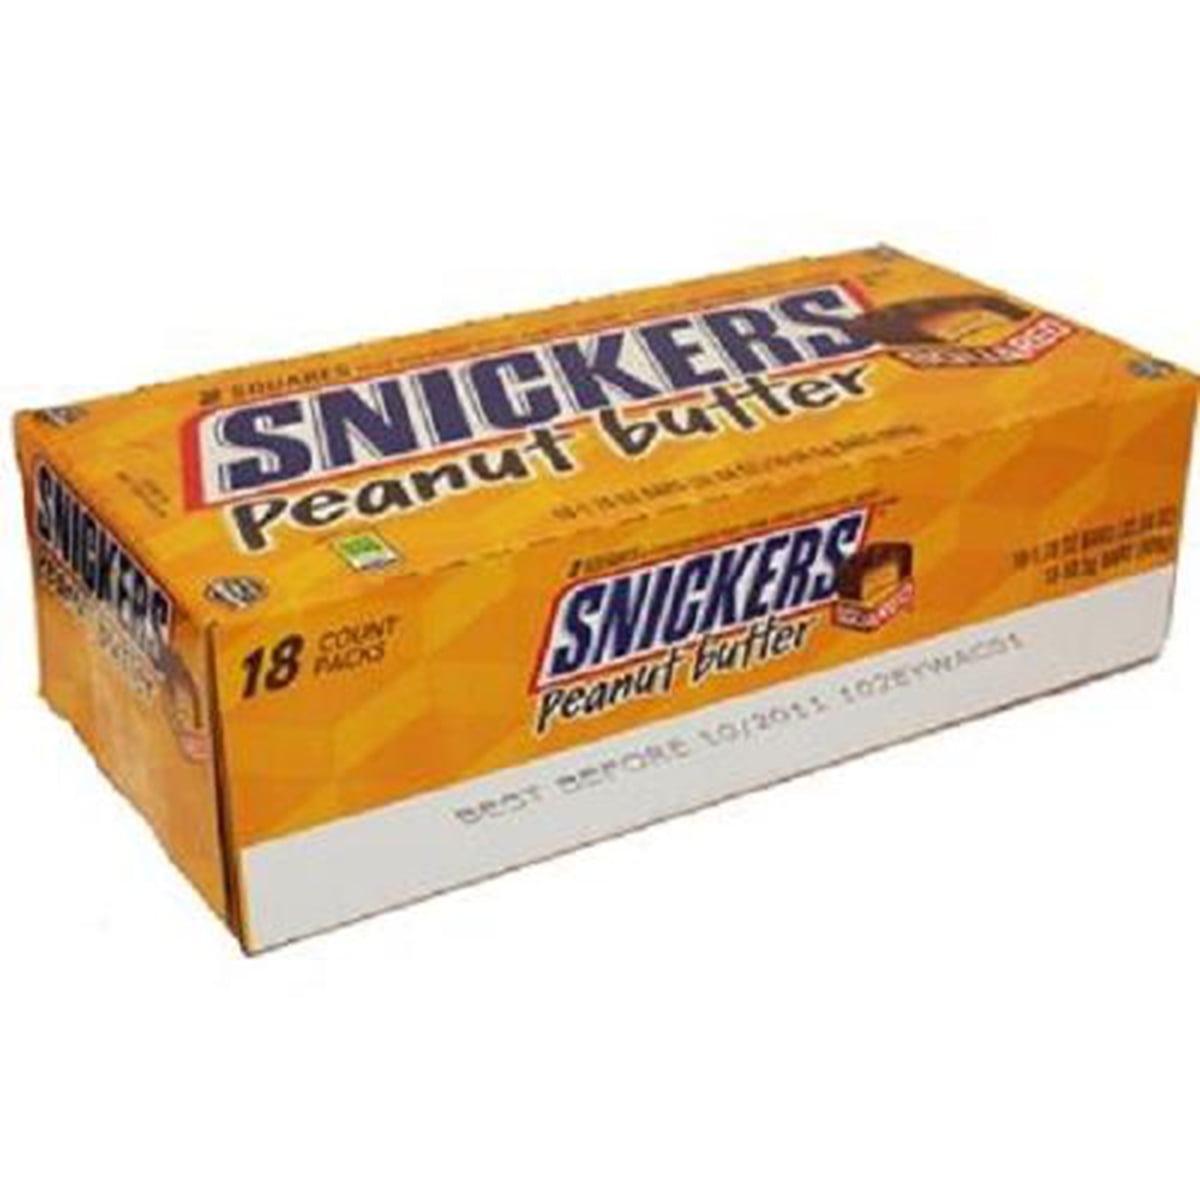 SNICKERS Peanut Butter Squared Singles Size Chocolate Candy Bar, 1.78 oz